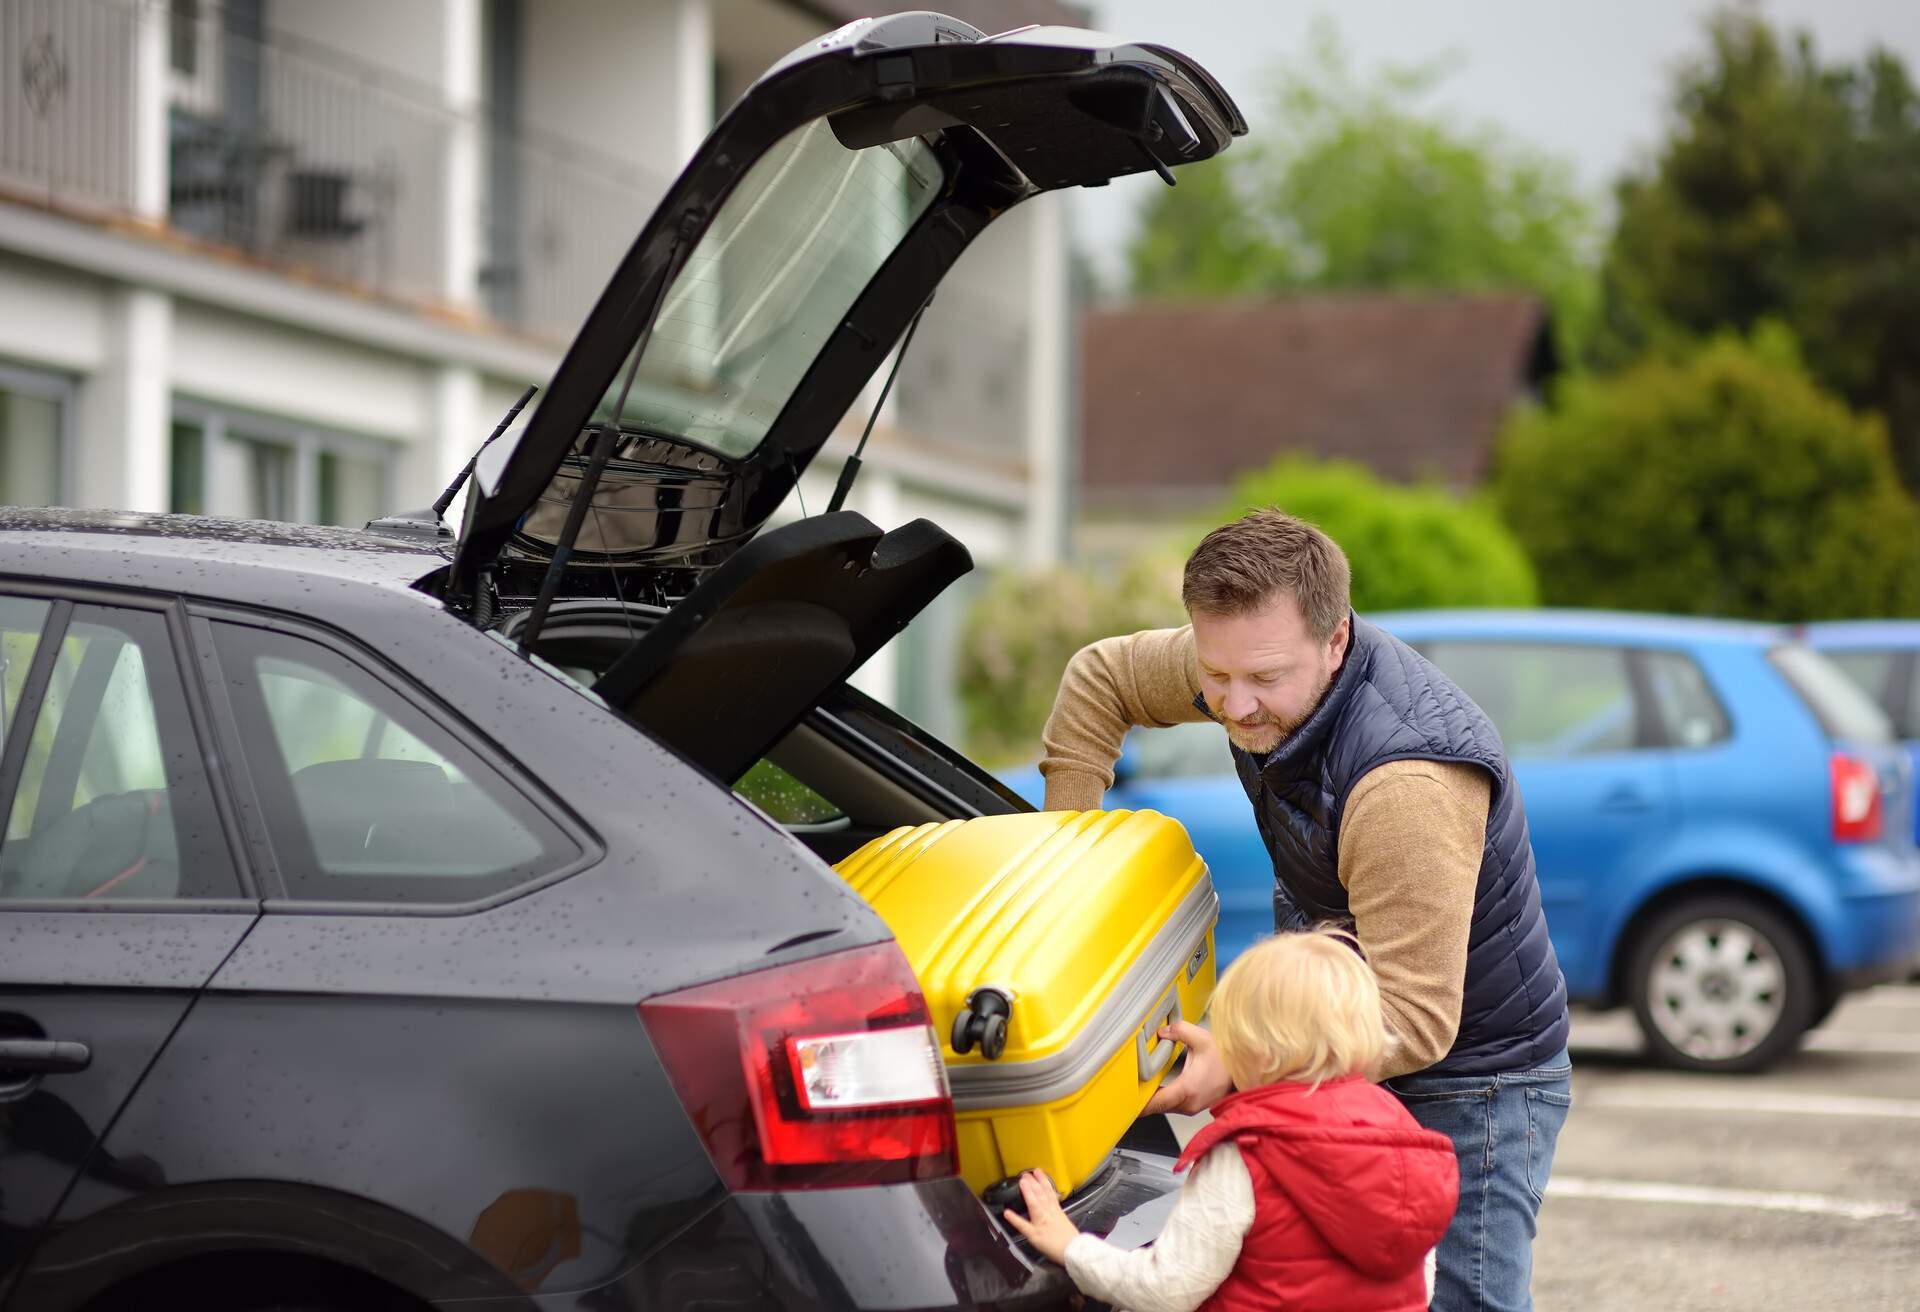 A man and a kid loading a yellow luggage into a black car's trunk.